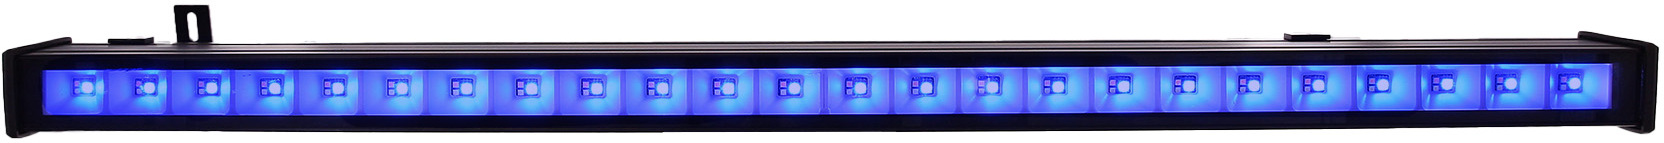 Power Lighting Barre Led 72 Ip - LED bar - Main picture